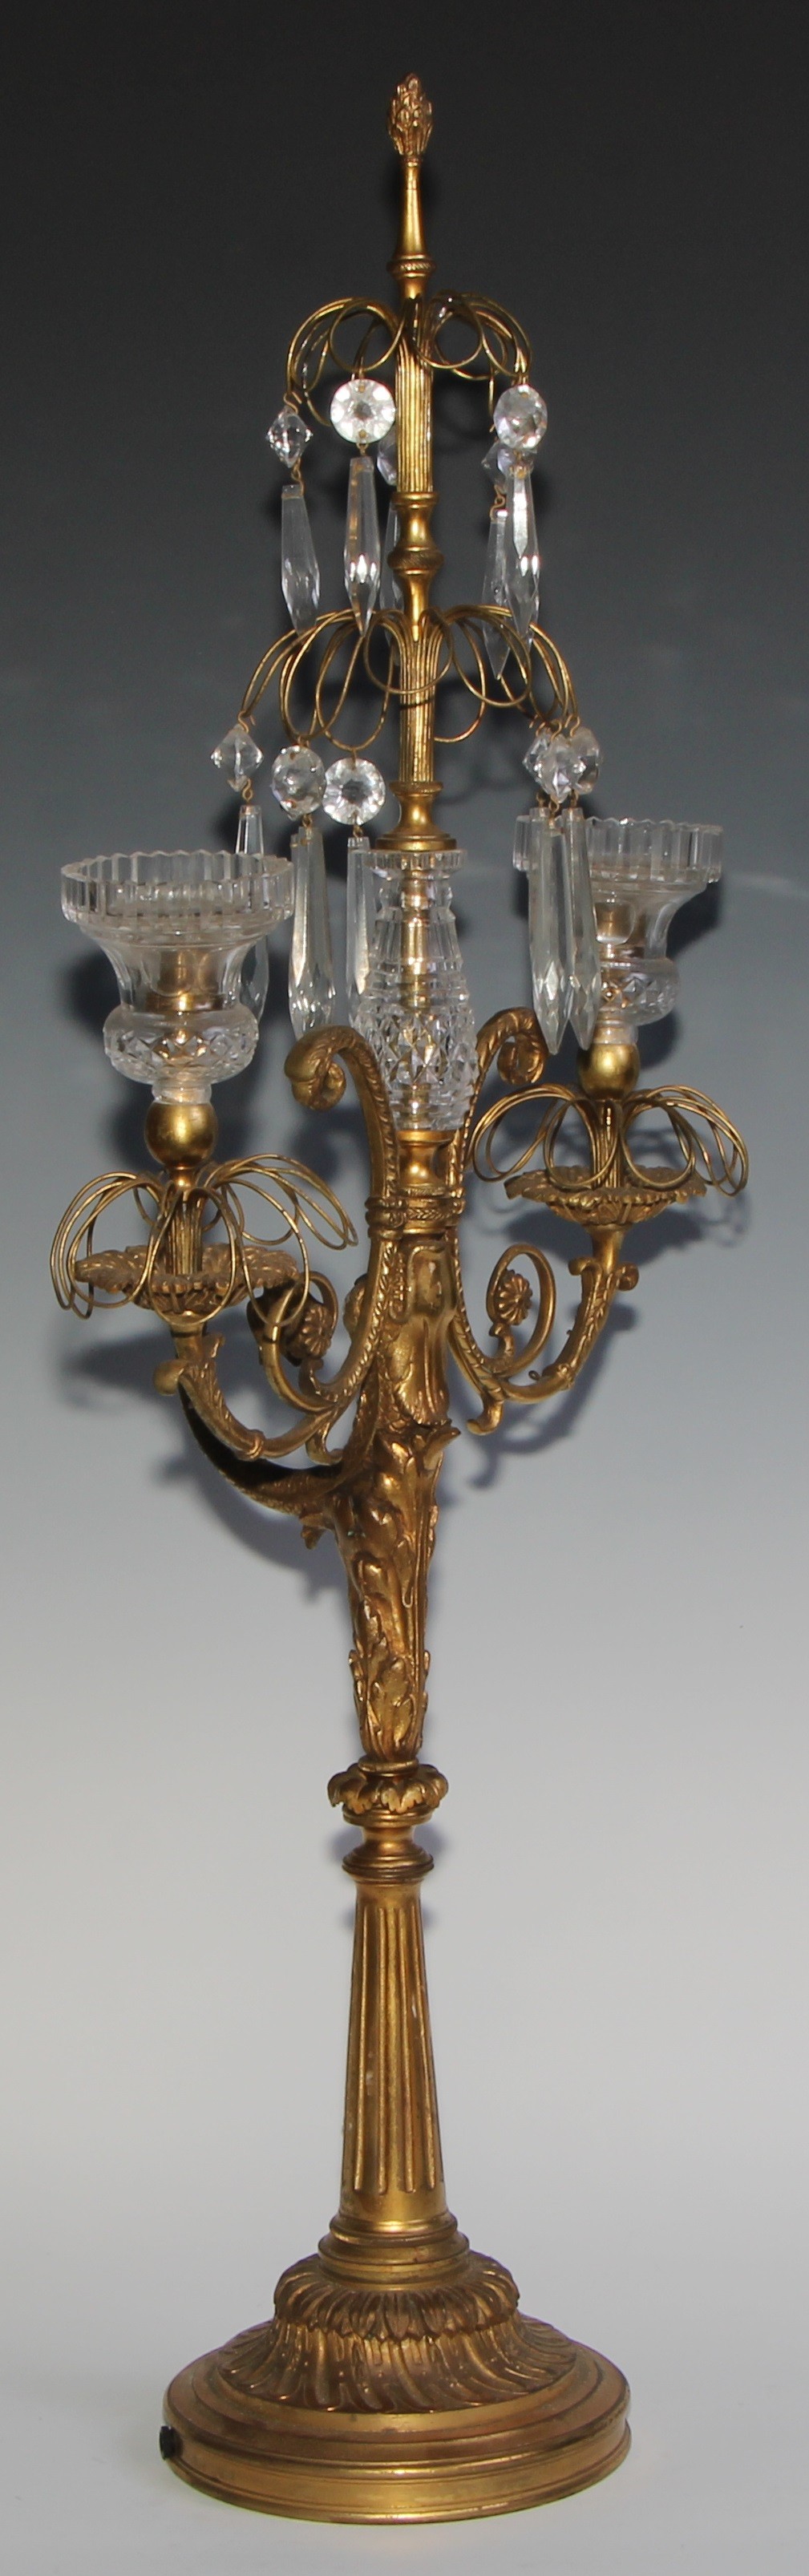 A 19th century French gilt bronze and hobnail-cut glass two-branch lustre candelabra, cast with a - Image 3 of 5